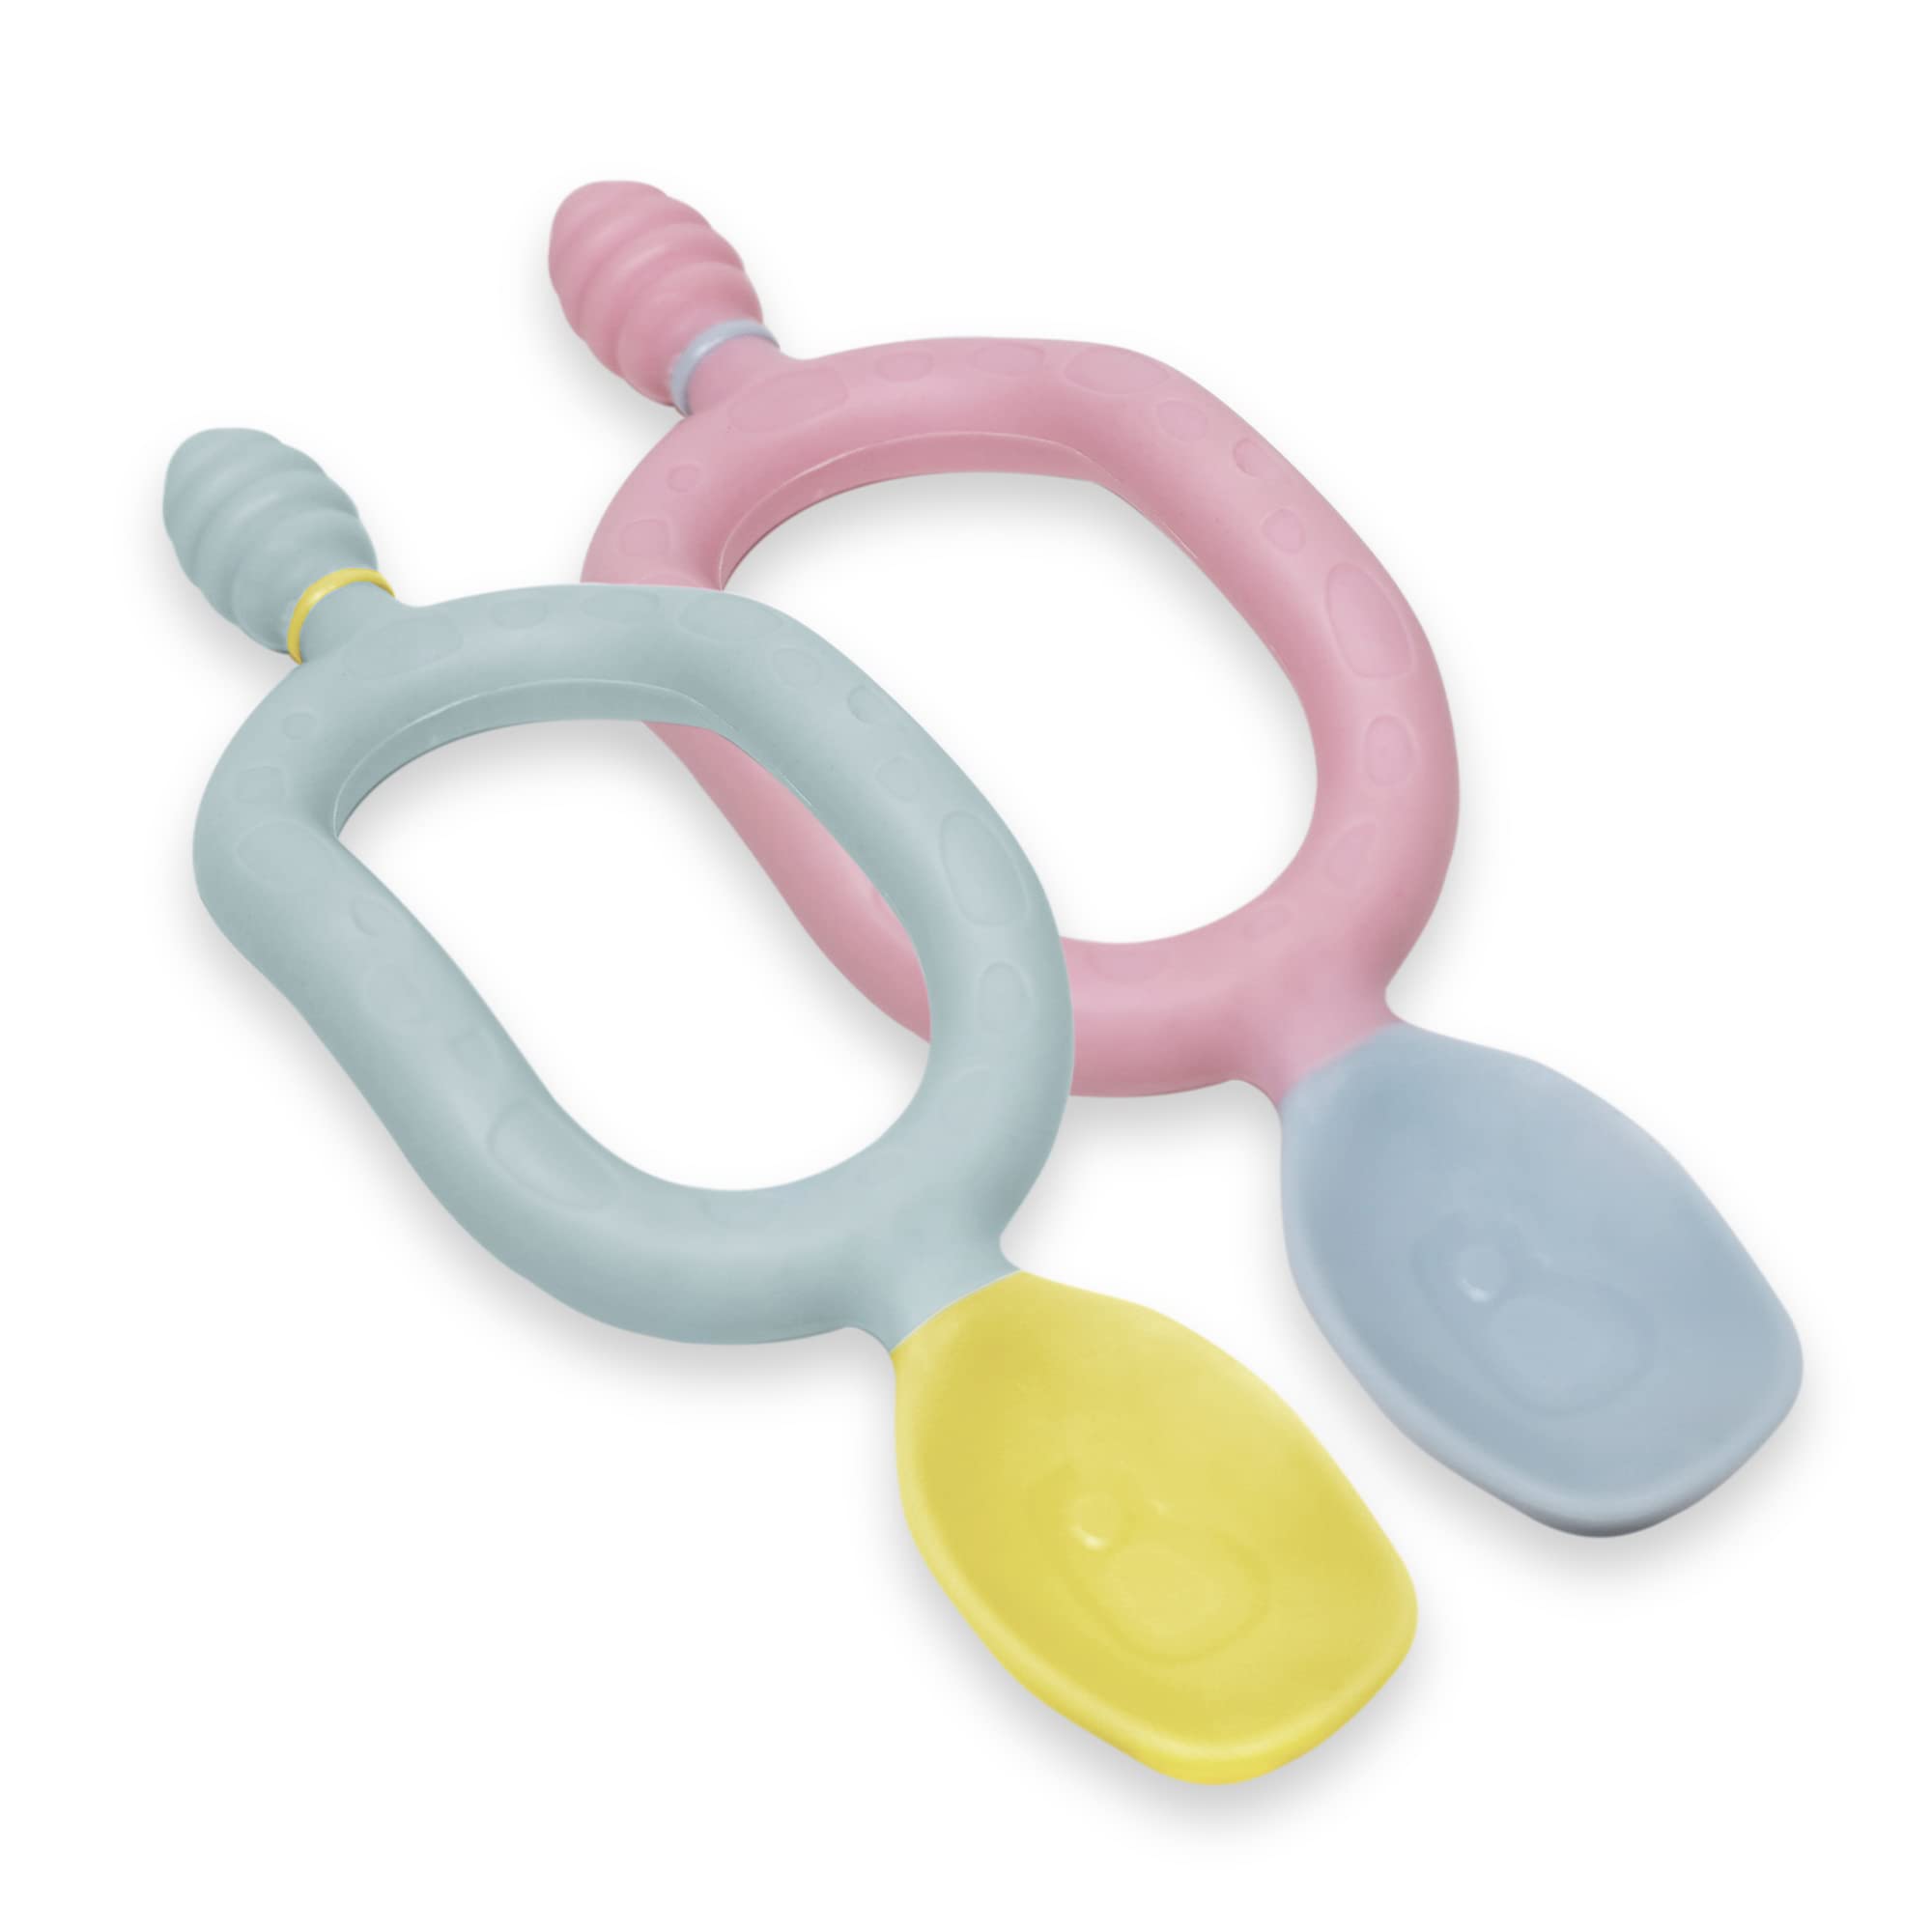 Bibado - Dippit Multi-Stage Self Feeding BPA Free Baby Spoons and Dipper, 2-Handed Multi-Grip Baby Led Weaning Spoons, baby spoons self feeding 6 months and Up, Infant Spoons, Pink and Gray, Pack of 2